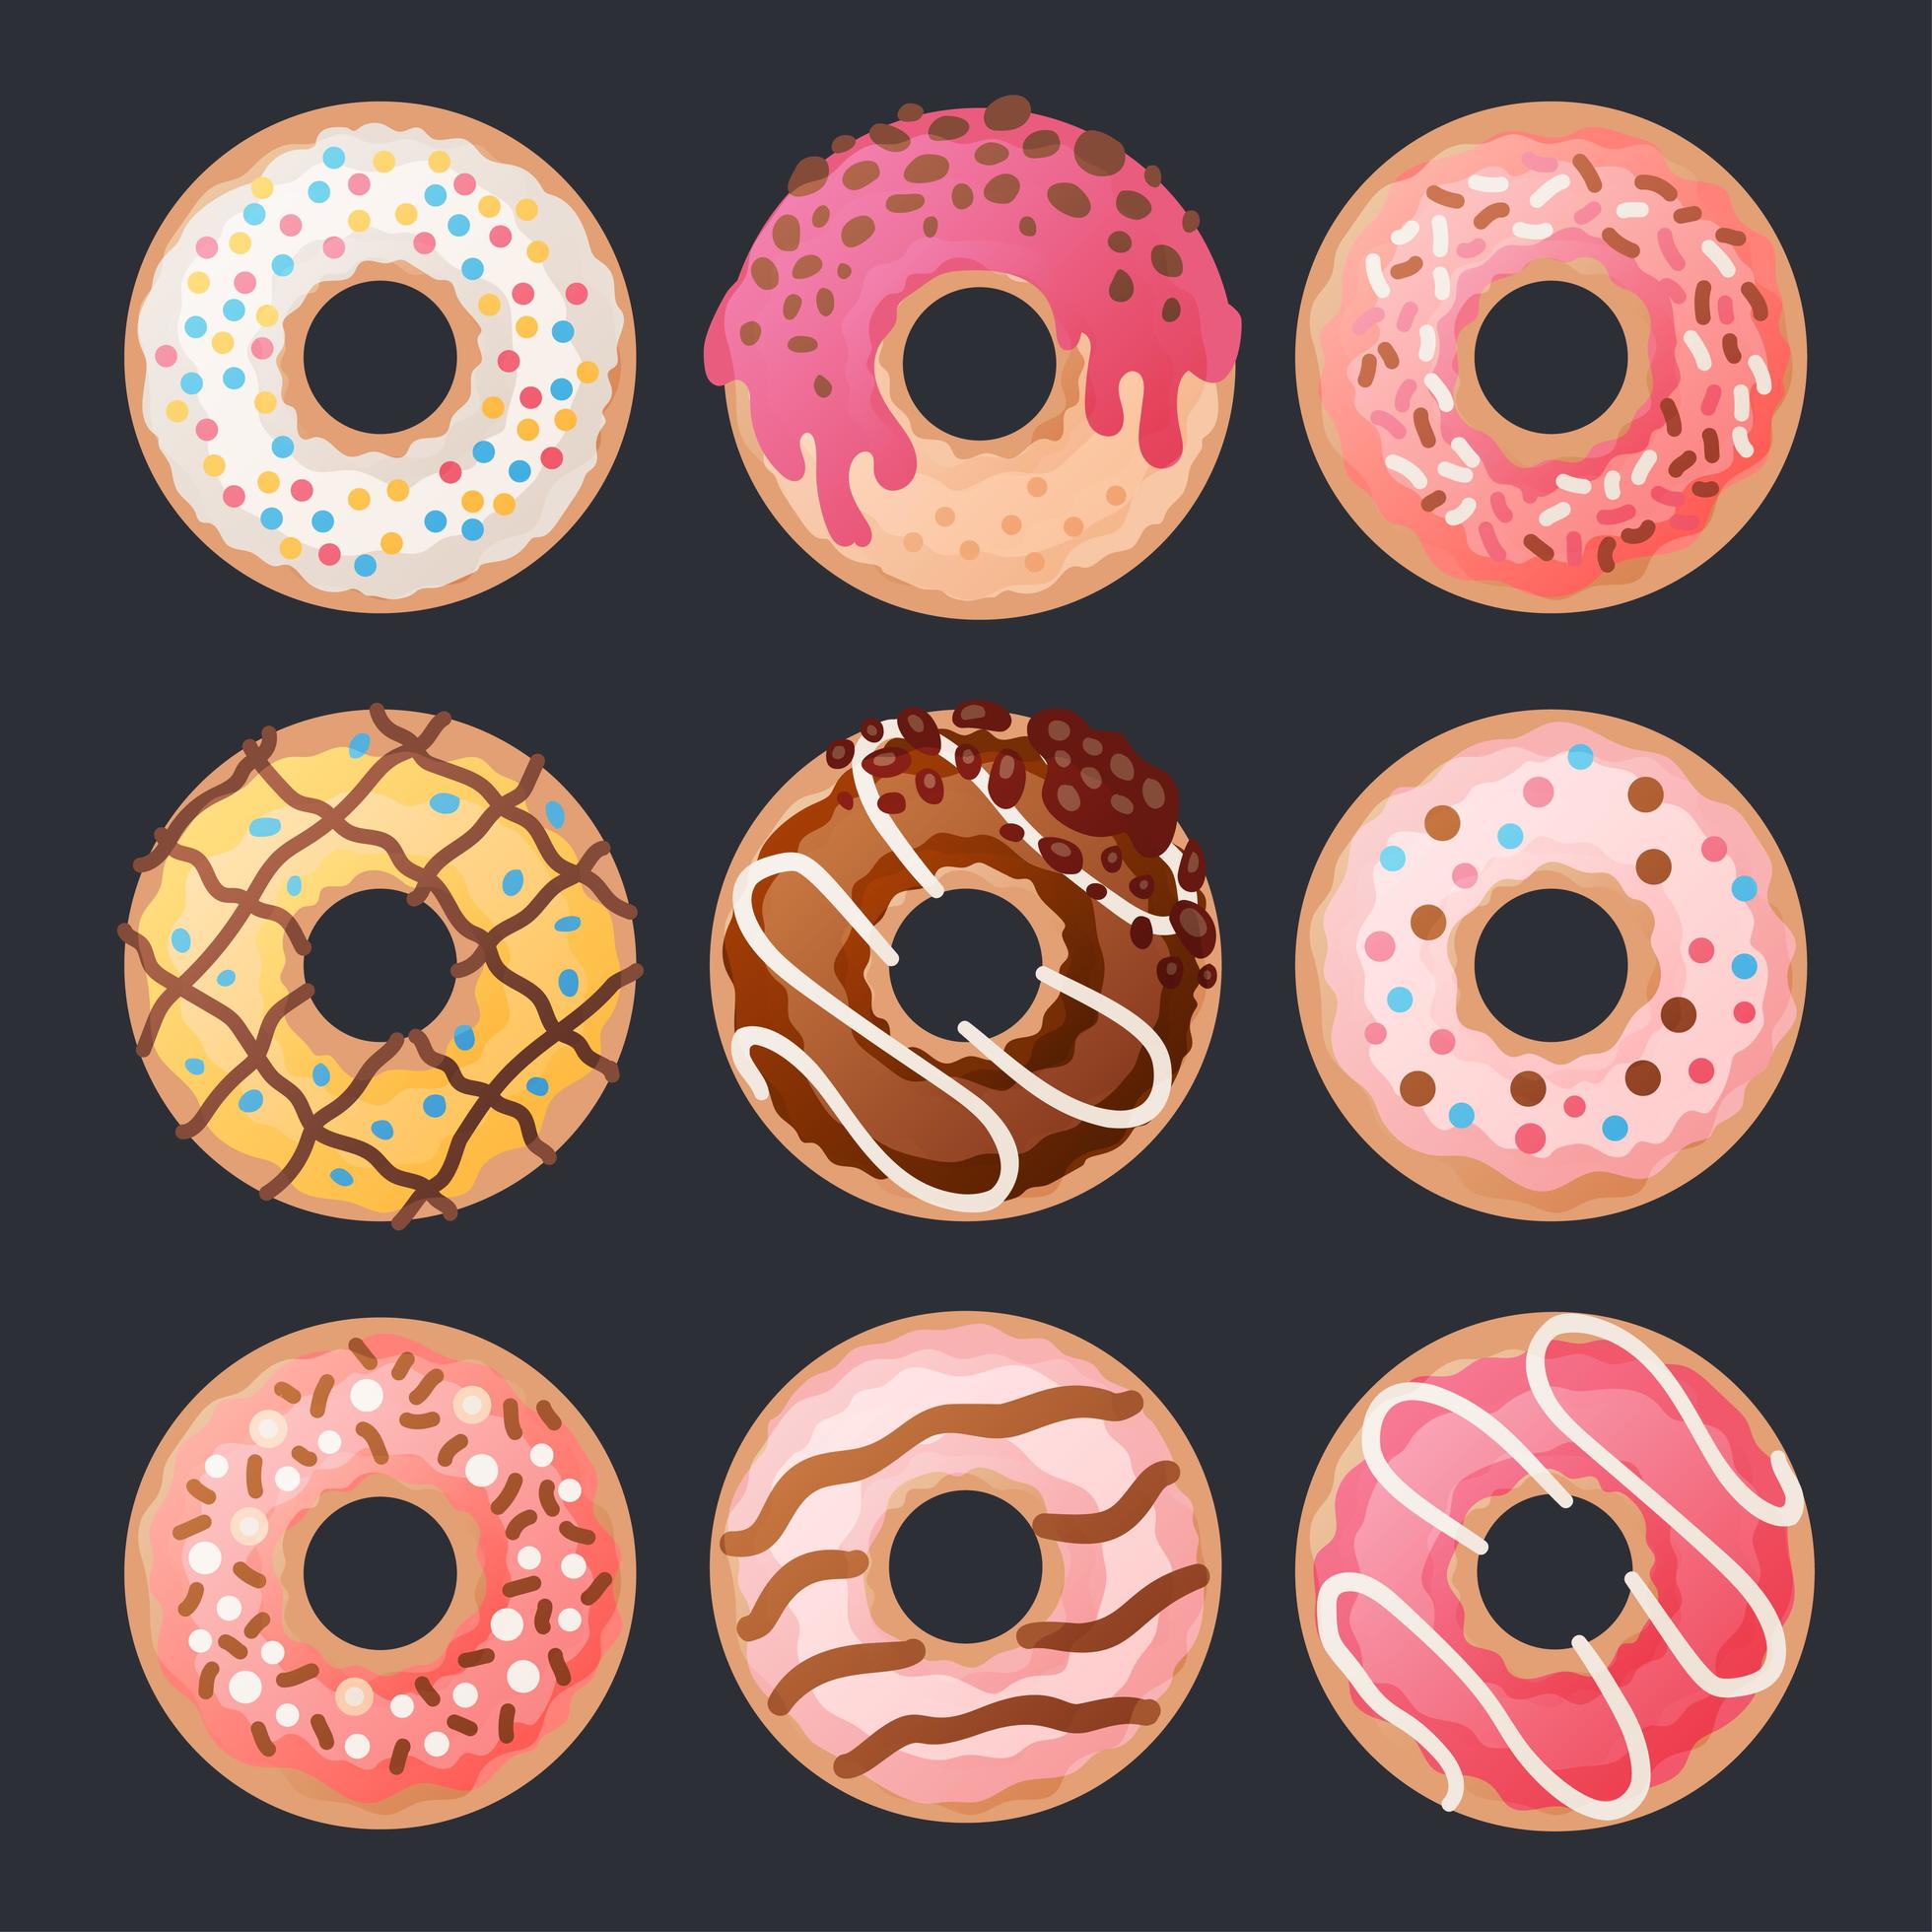 Set of 9 cartoon colorful donuts on black vector